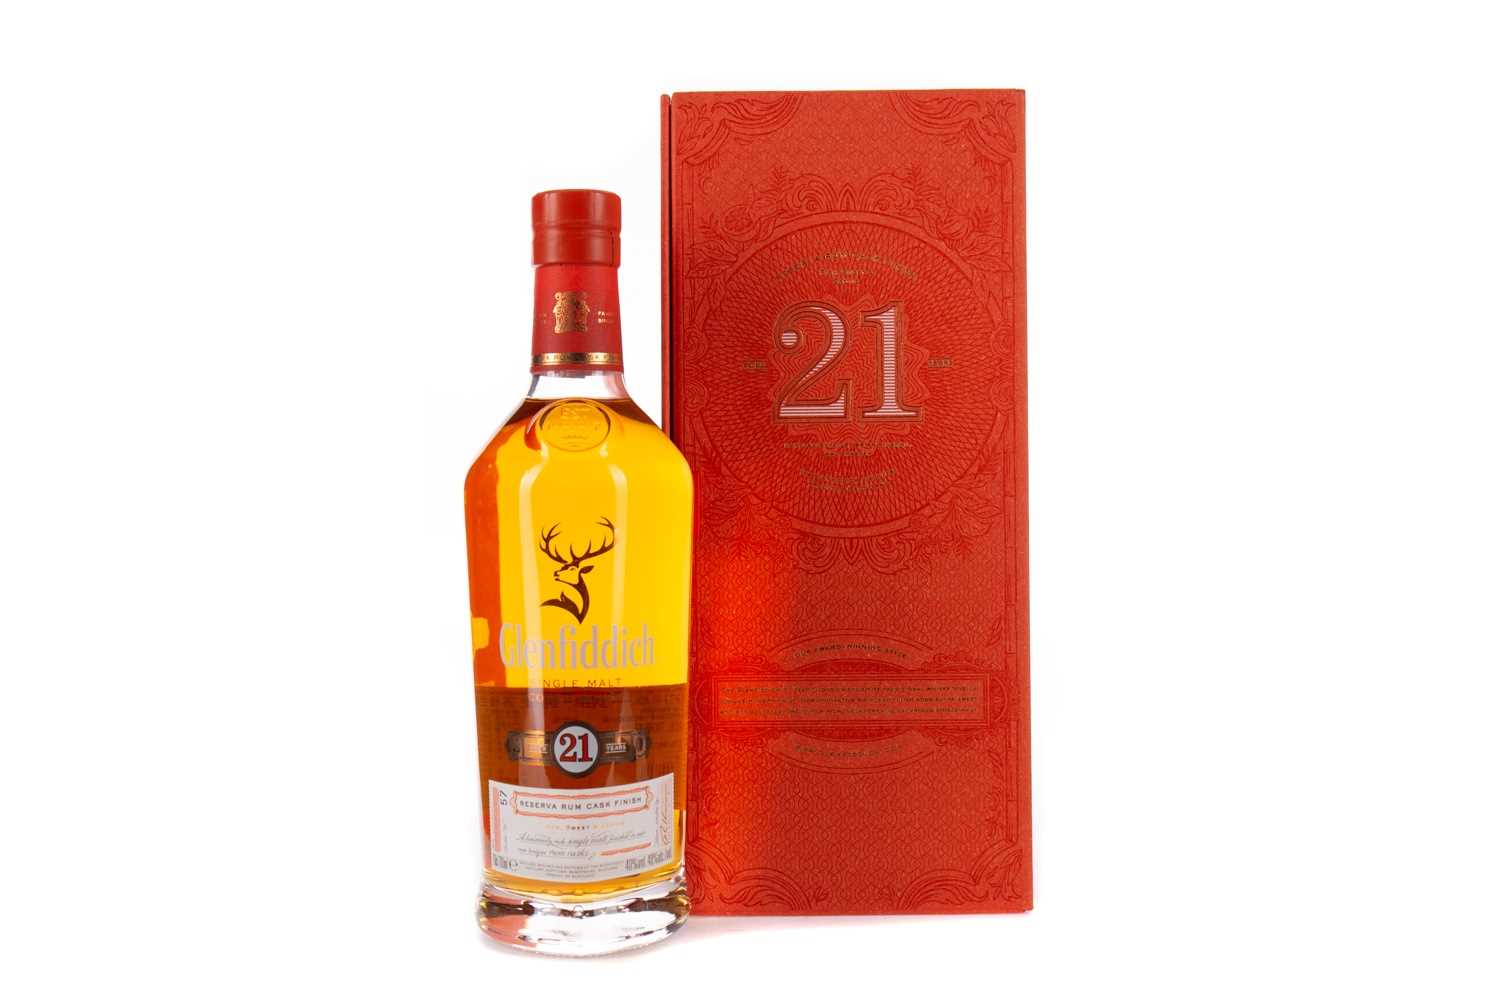 Lot 91 - GLENFIDDICH AGED 21 YEARS RUM CASK FINISH